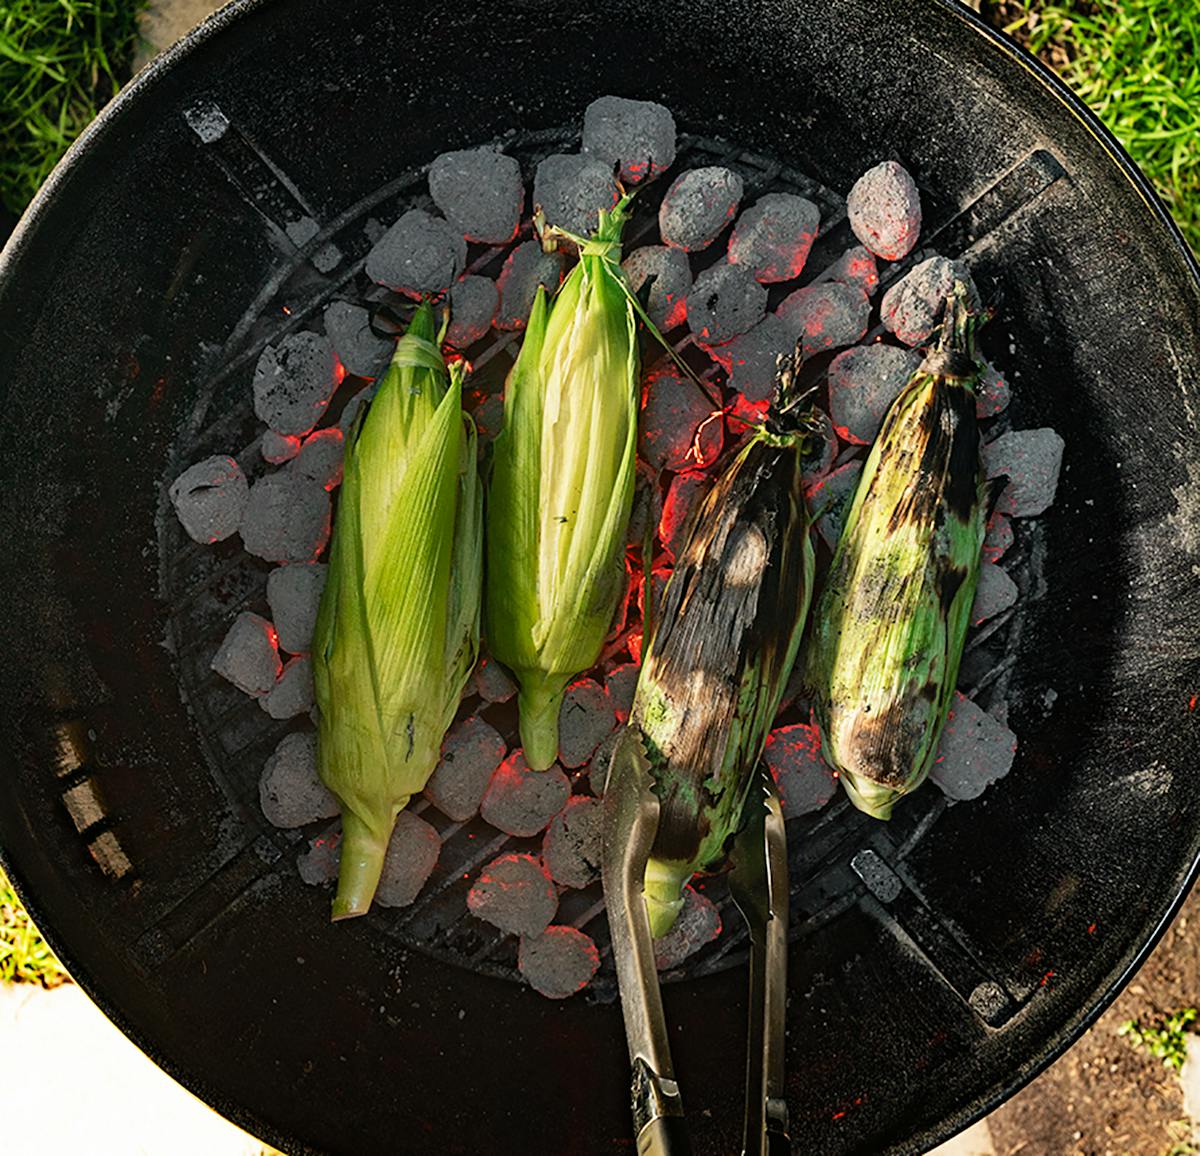 Grilling From The Garden Tips Techniques Weber Grills,Pet Snakes Black